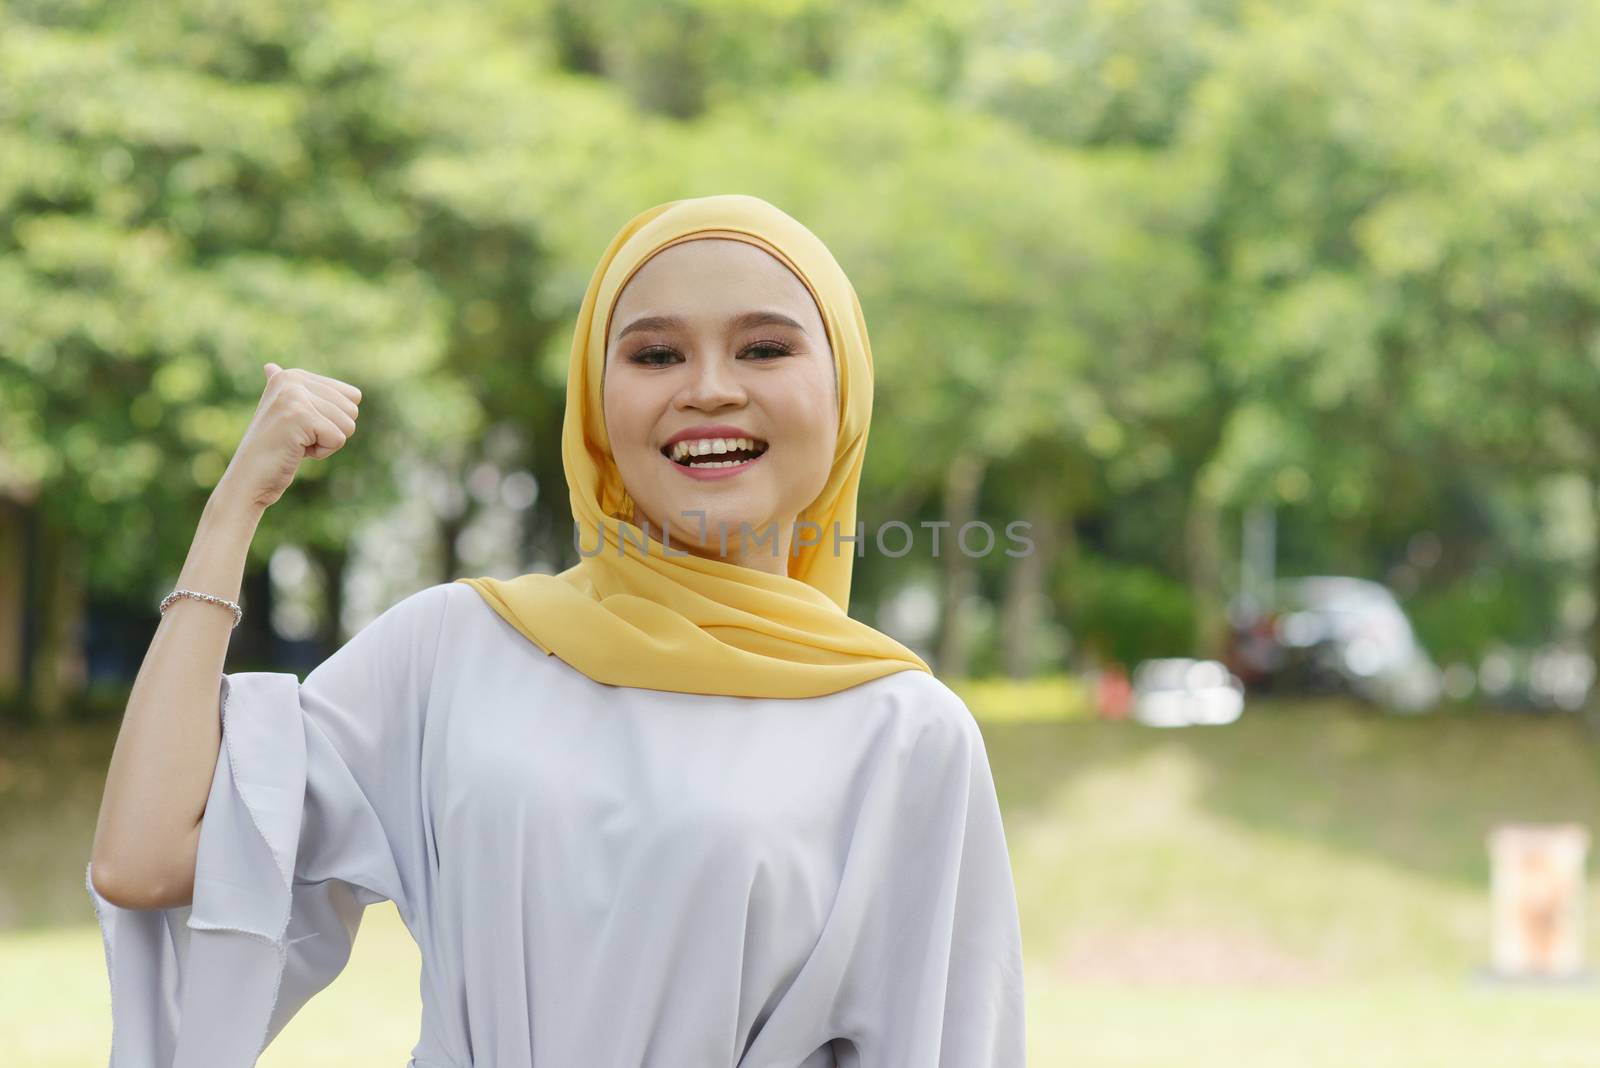 Portrait of cheerful Muslim girl thumb up, smiling at outdoor.